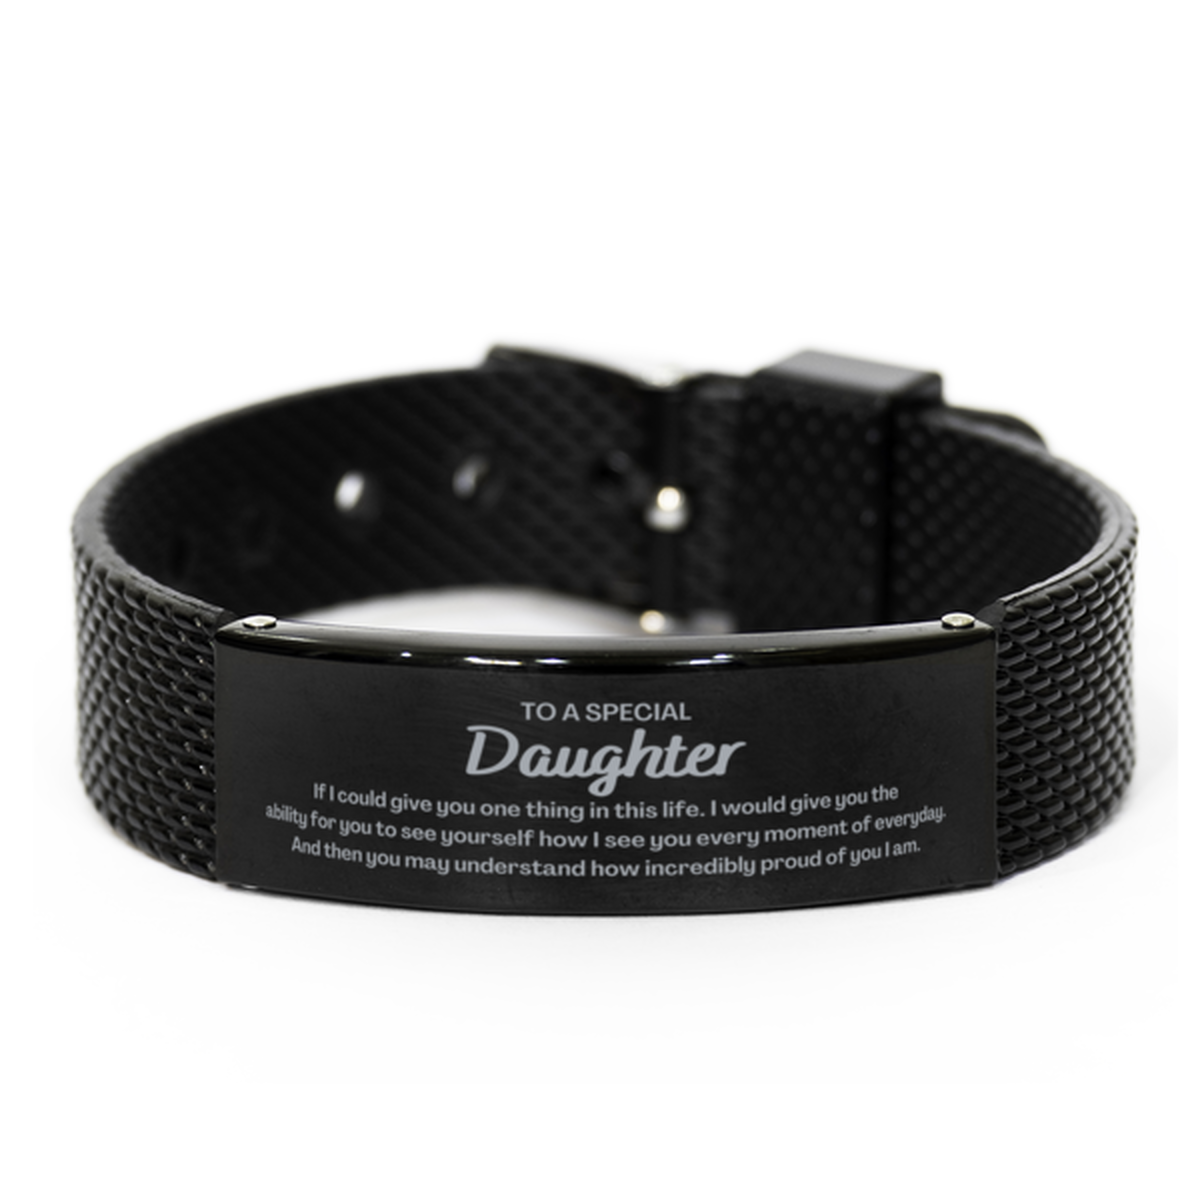 To My Daughter Black Shark Mesh Bracelet, Gifts For Daughter Engraved, Inspirational Gifts for Christmas Birthday, Epic Gifts for Daughter To A Special Daughter how incredibly proud of you I am